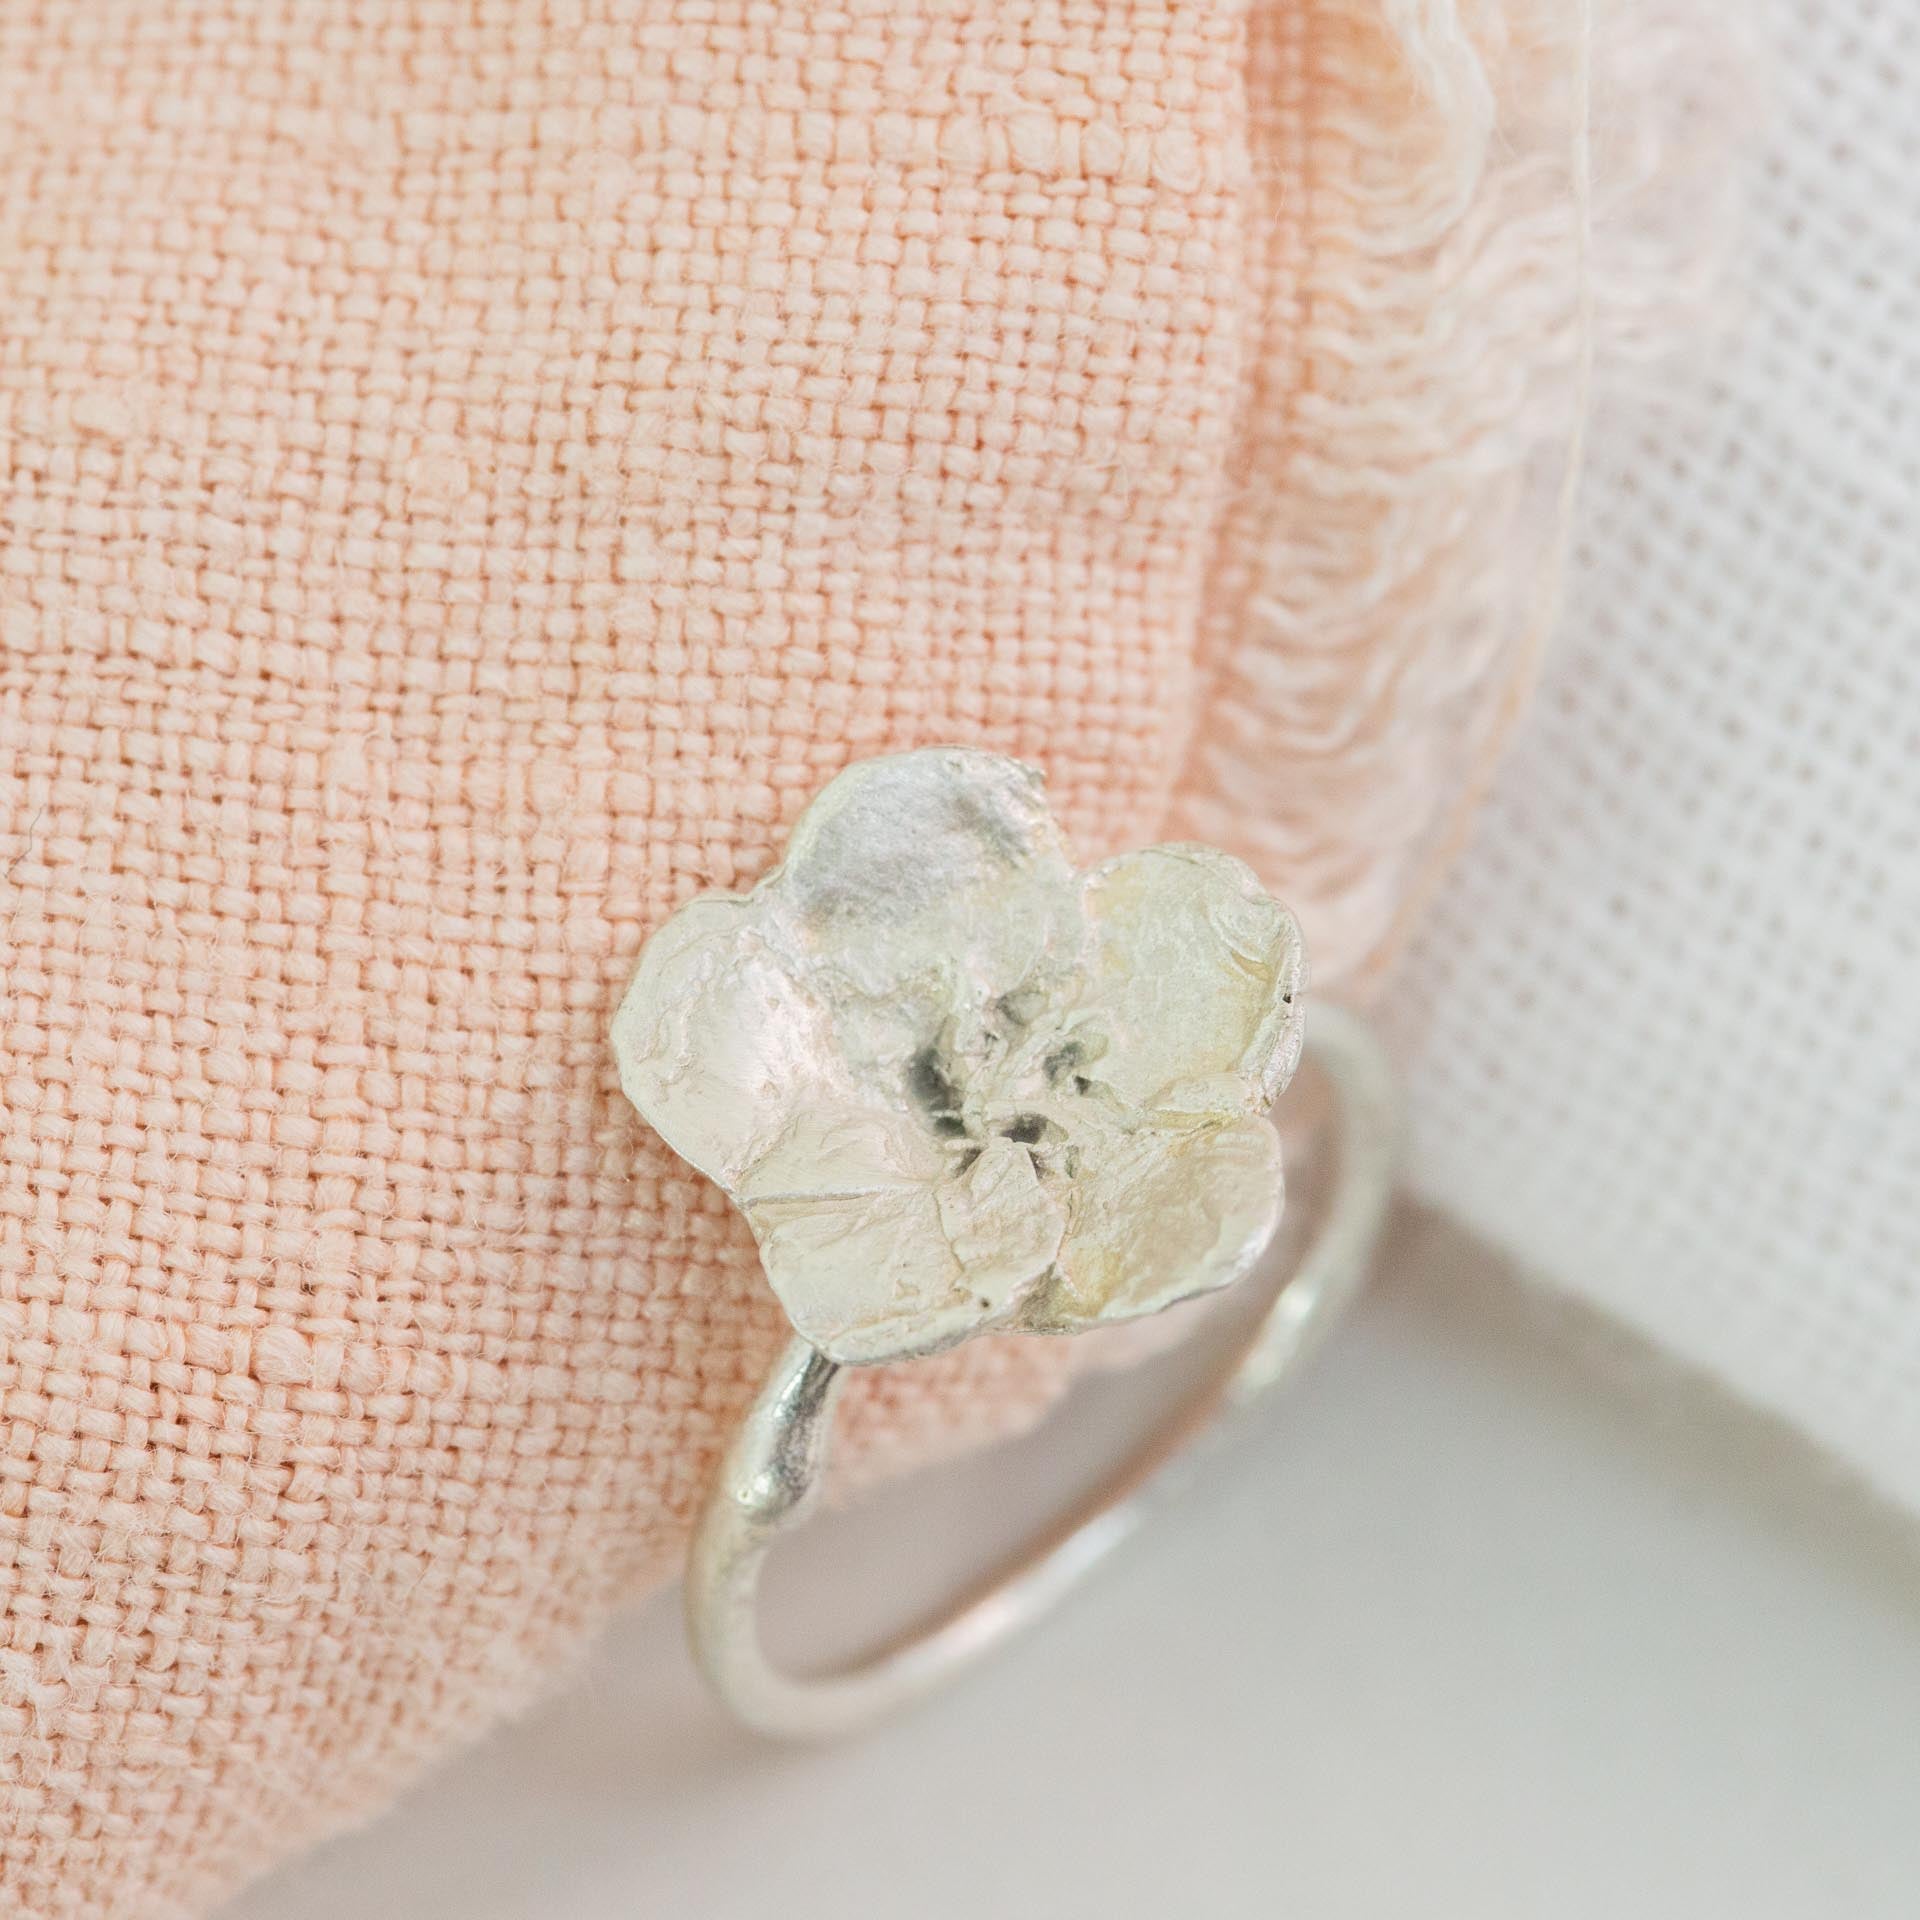 silver flower ring next to pink and white cloth